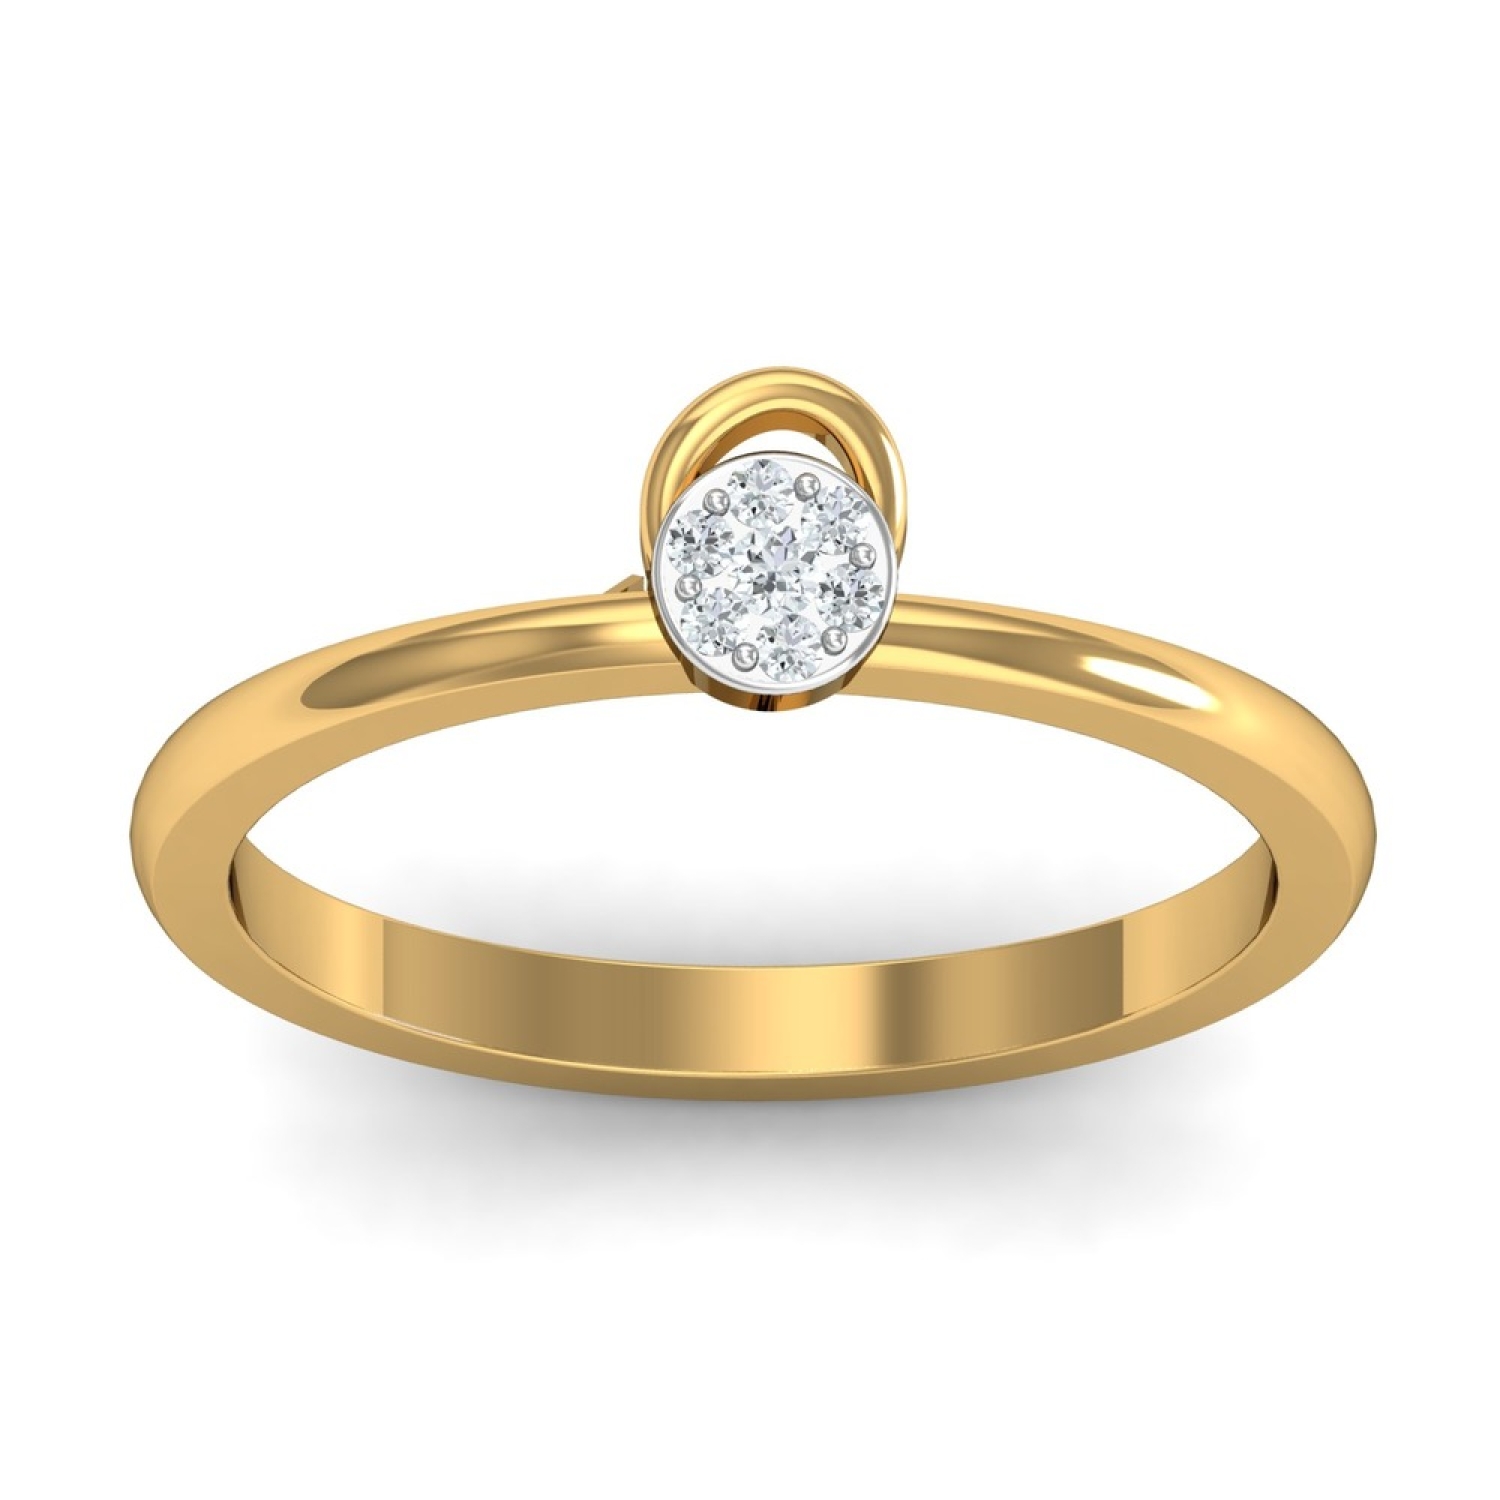 Buy Gold Rings Online in India | Latest Designs at Best Price by PC Jeweller